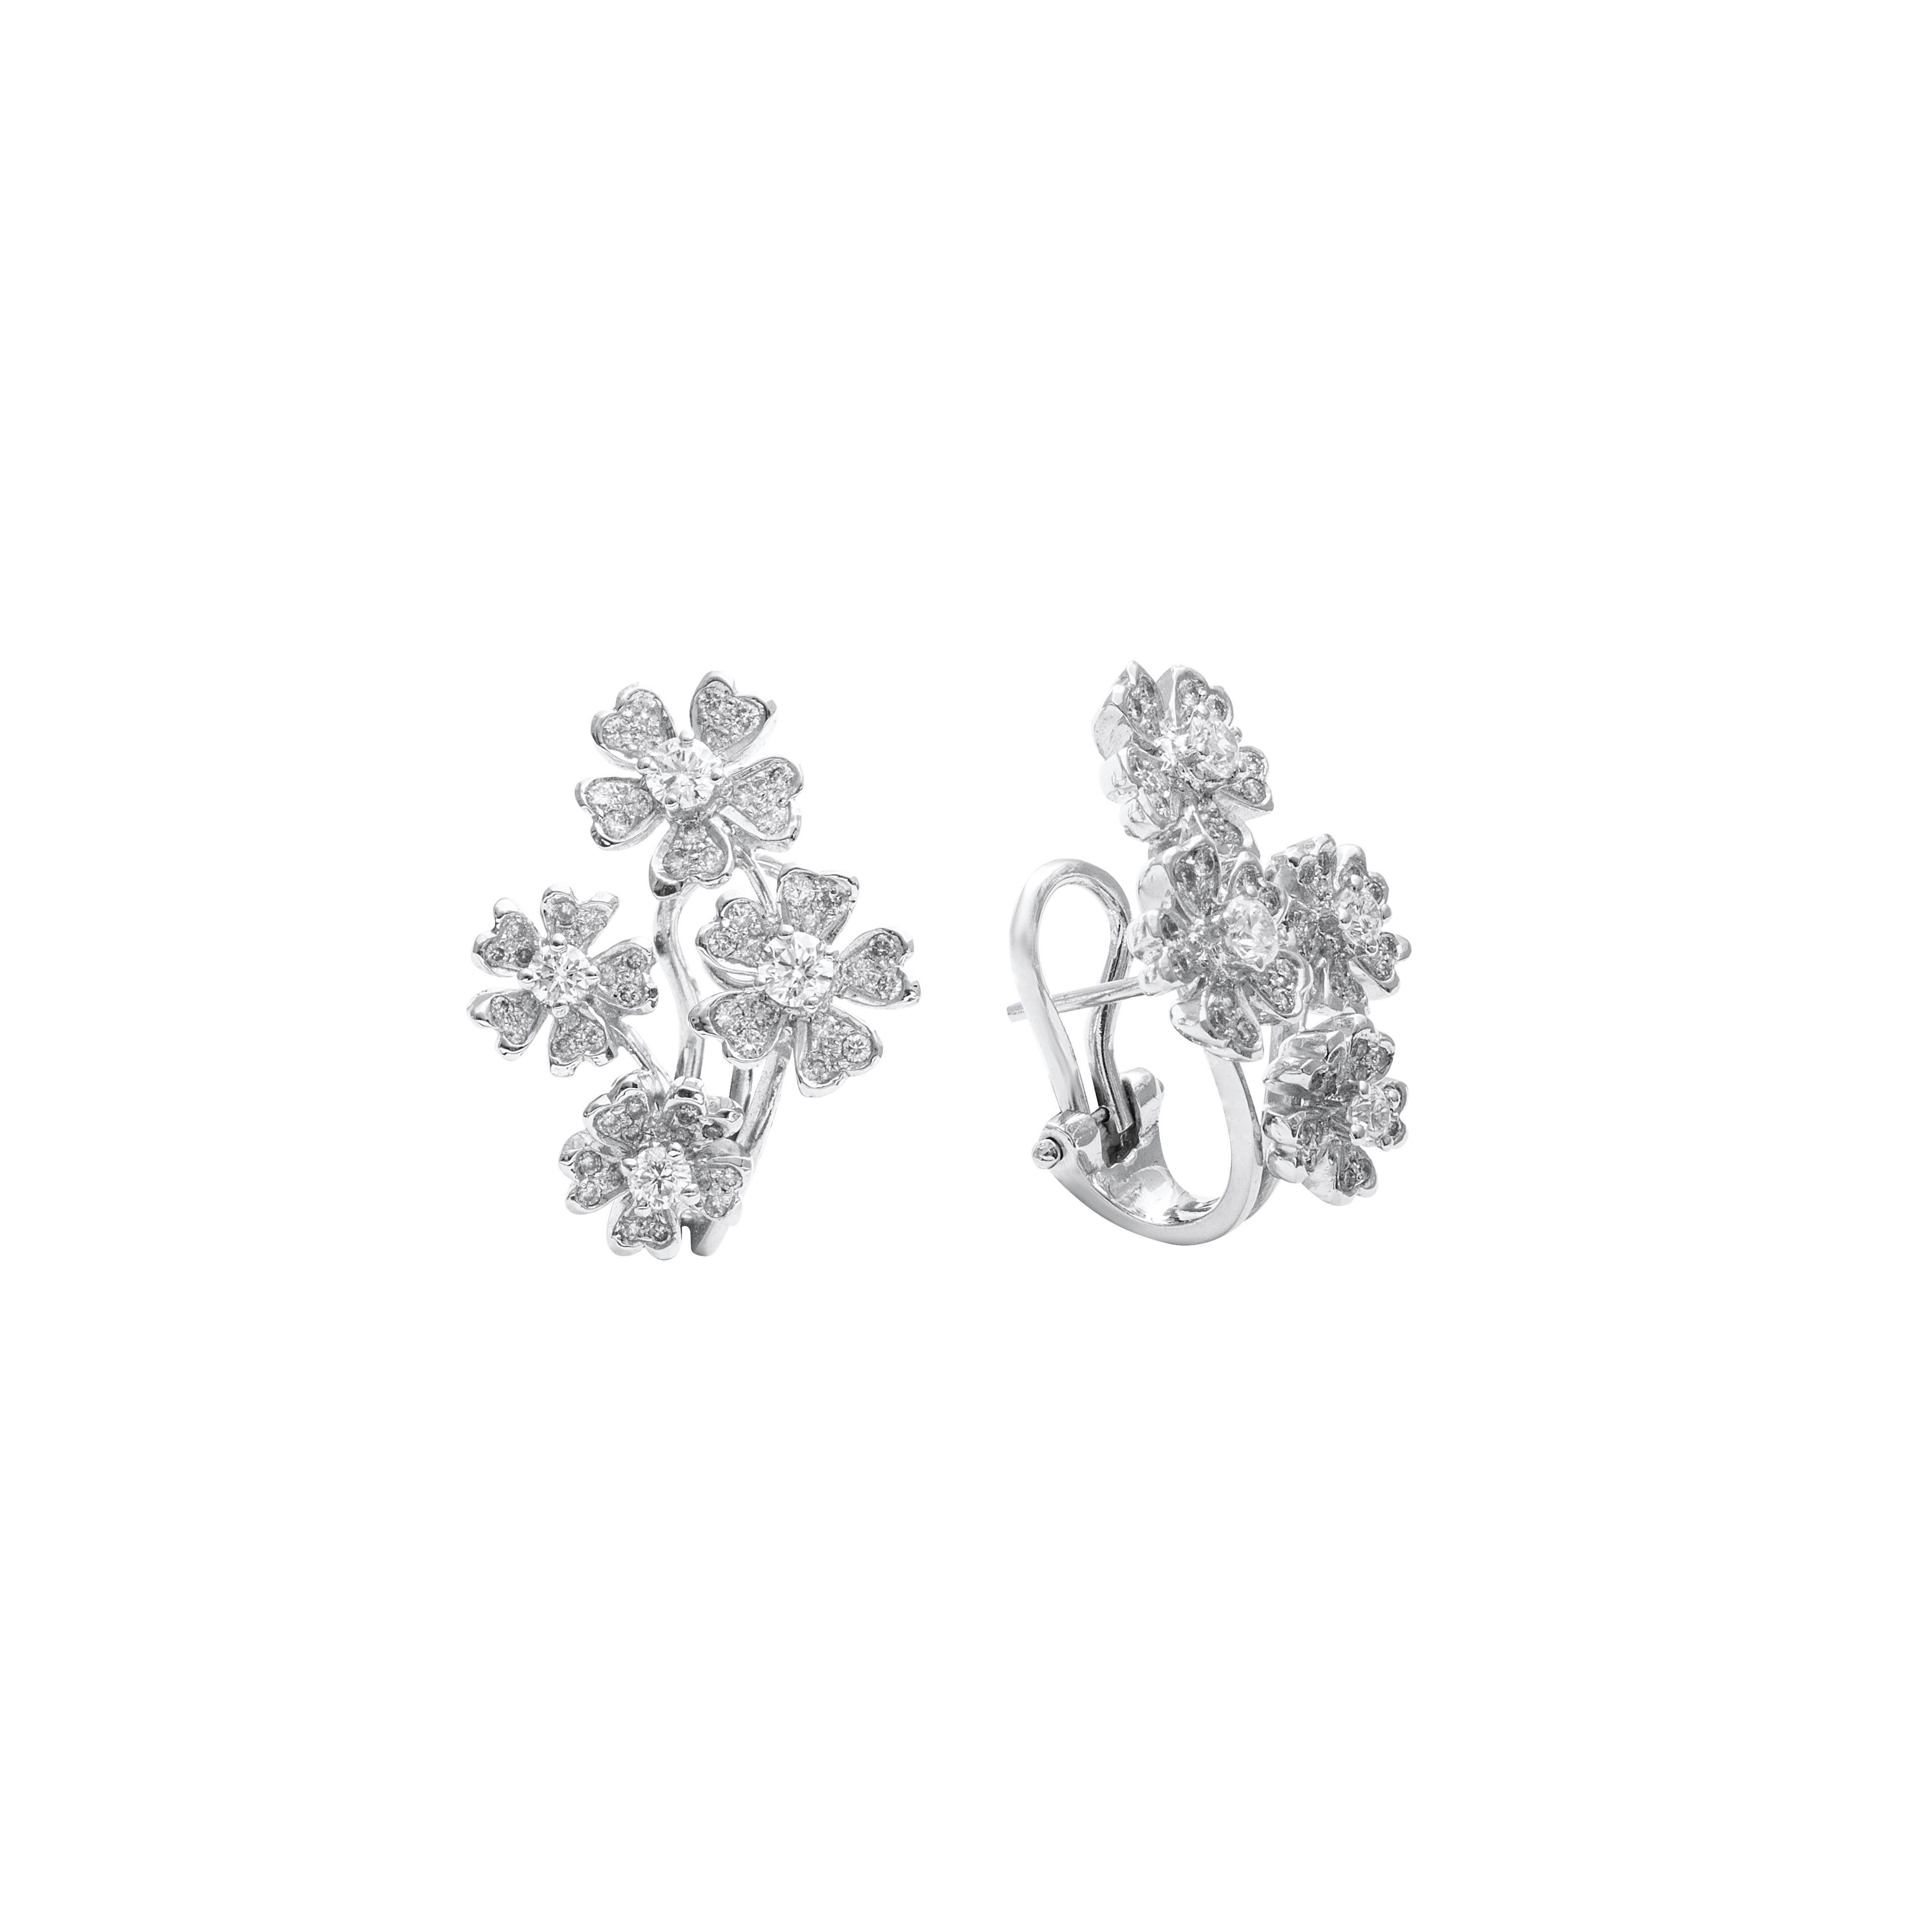 18 Karat White Gold Floral Diamond Earrings

A beautiful pair of floral earrings, set in 18 Karat white gold and studded with diamonds is ideal for both day and evening wear. 

18 Karat Gold - 14.638gms
Diamonds - 1.81cts